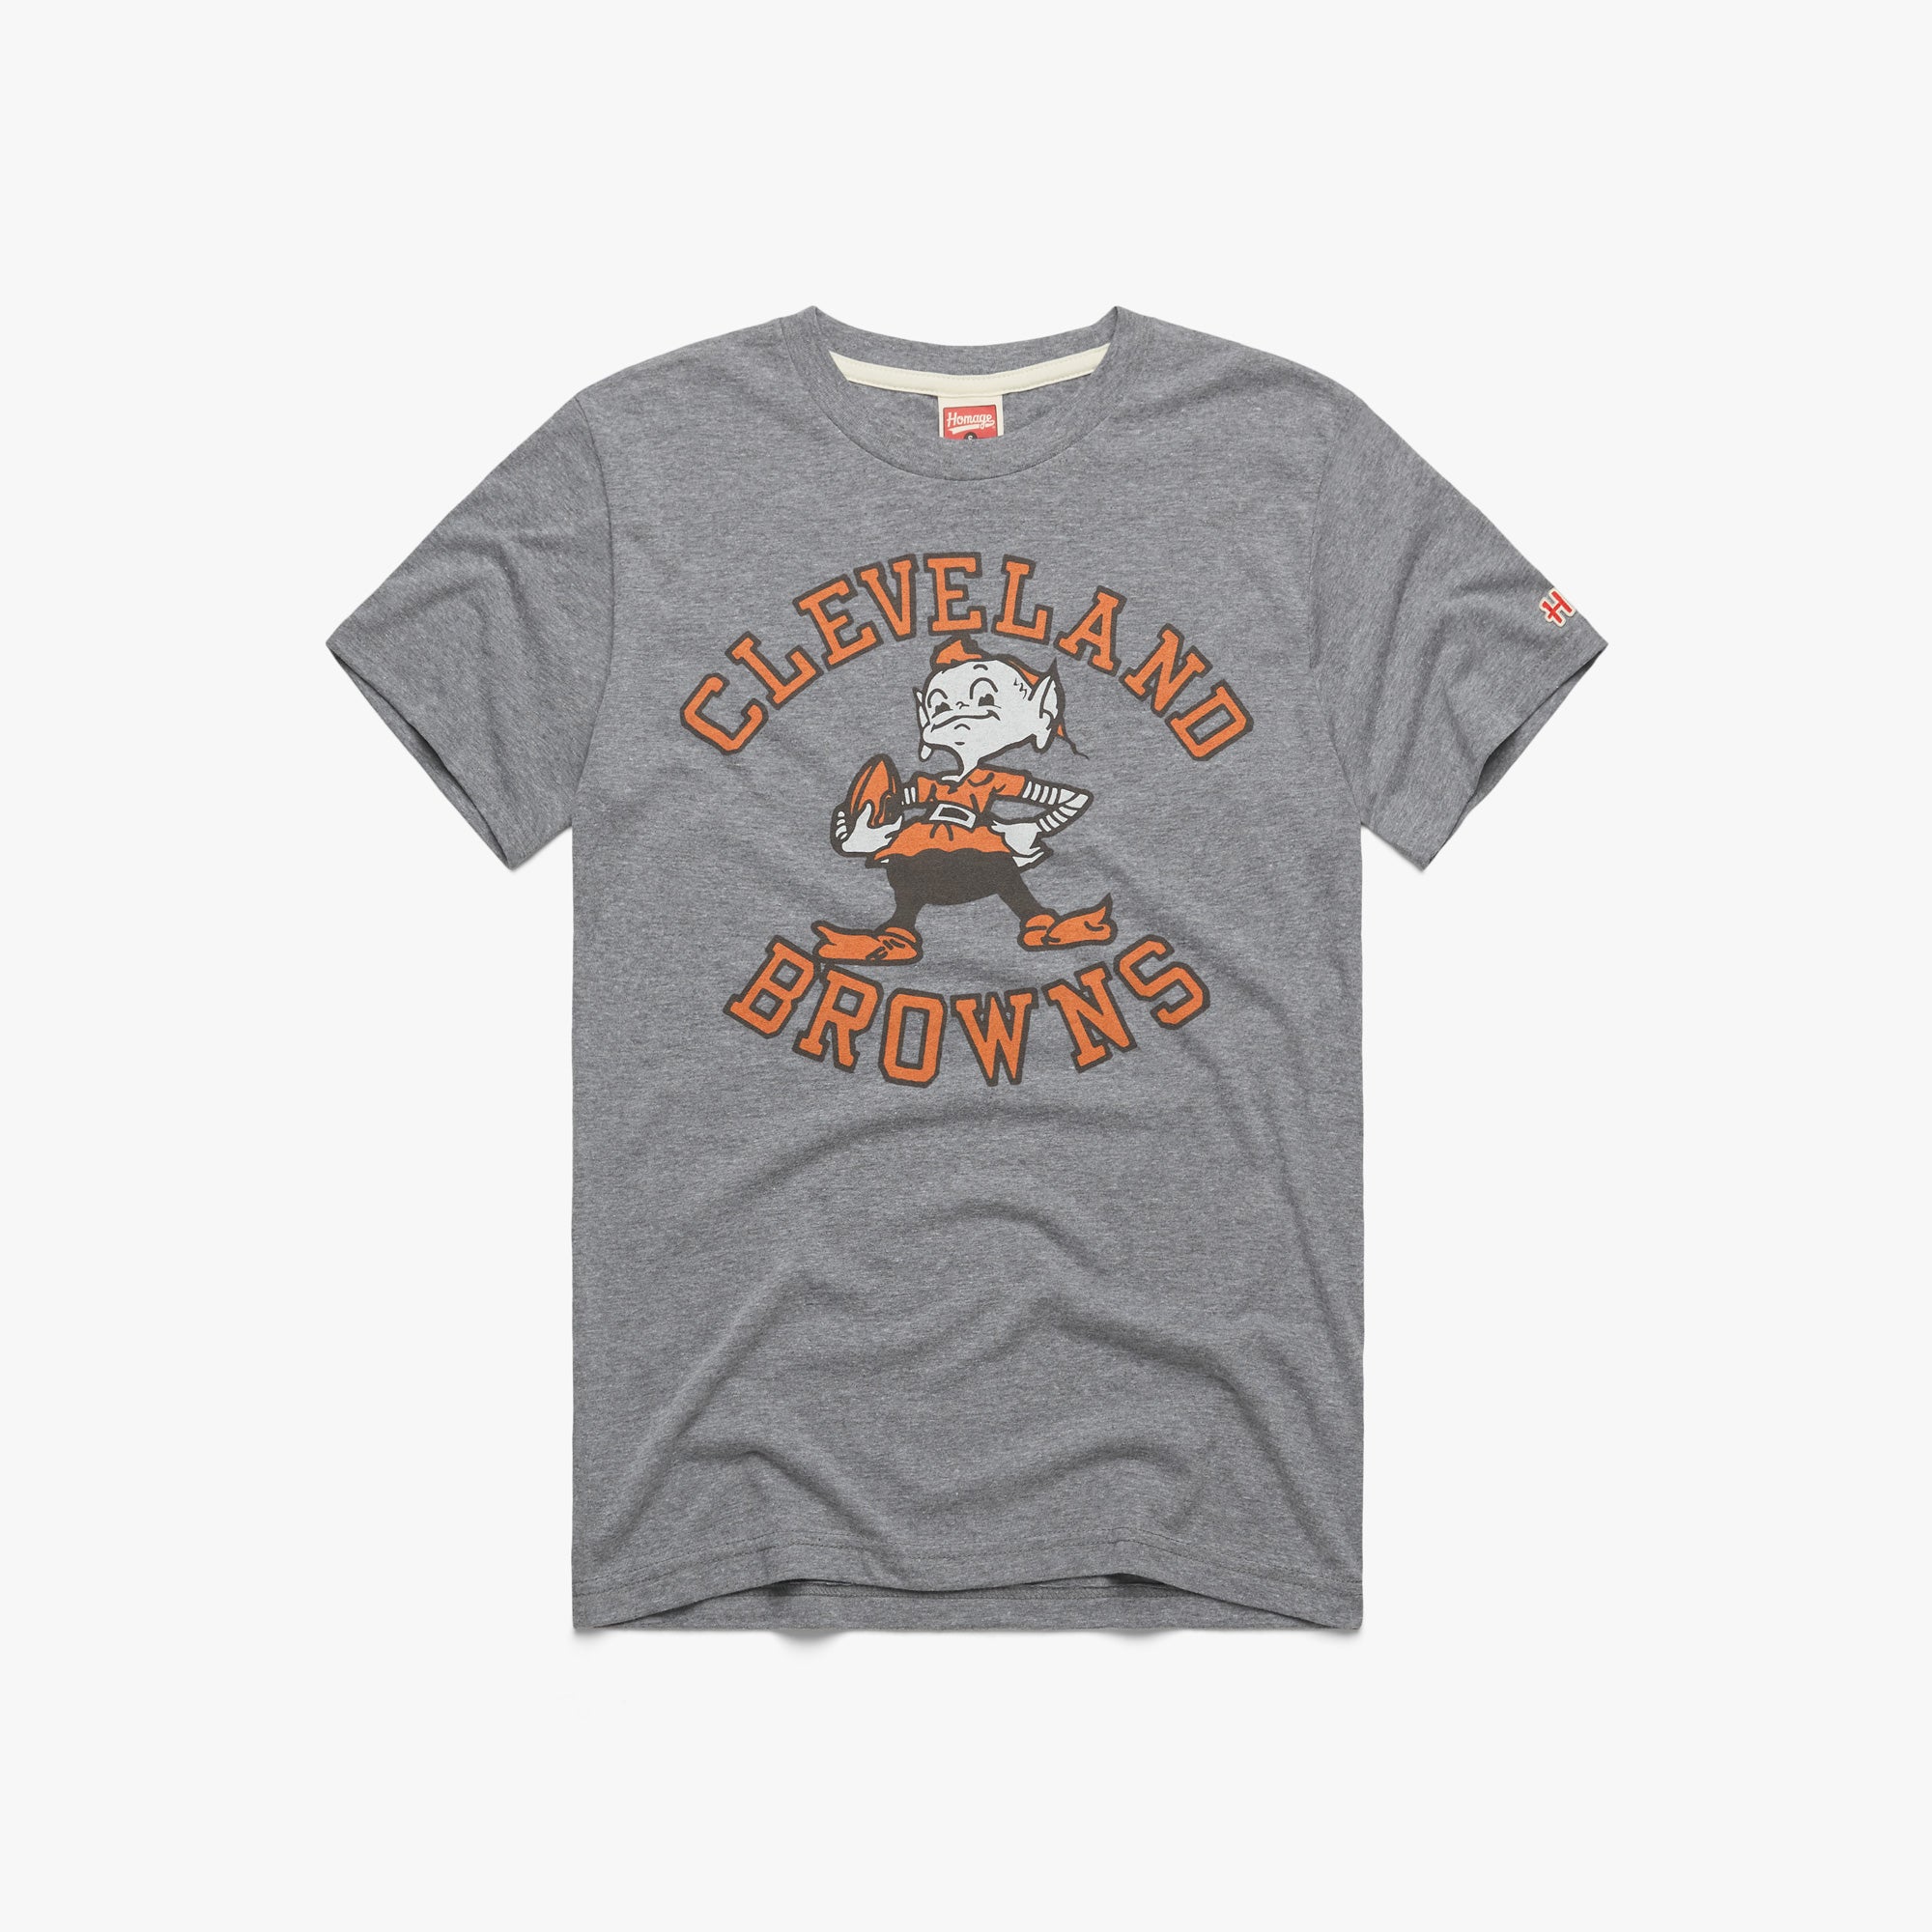 Cleveland Browns Brownie '59 T-Shirt from Homage. | Officially Licensed Vintage NFL Apparel from Homage Pro Shop.